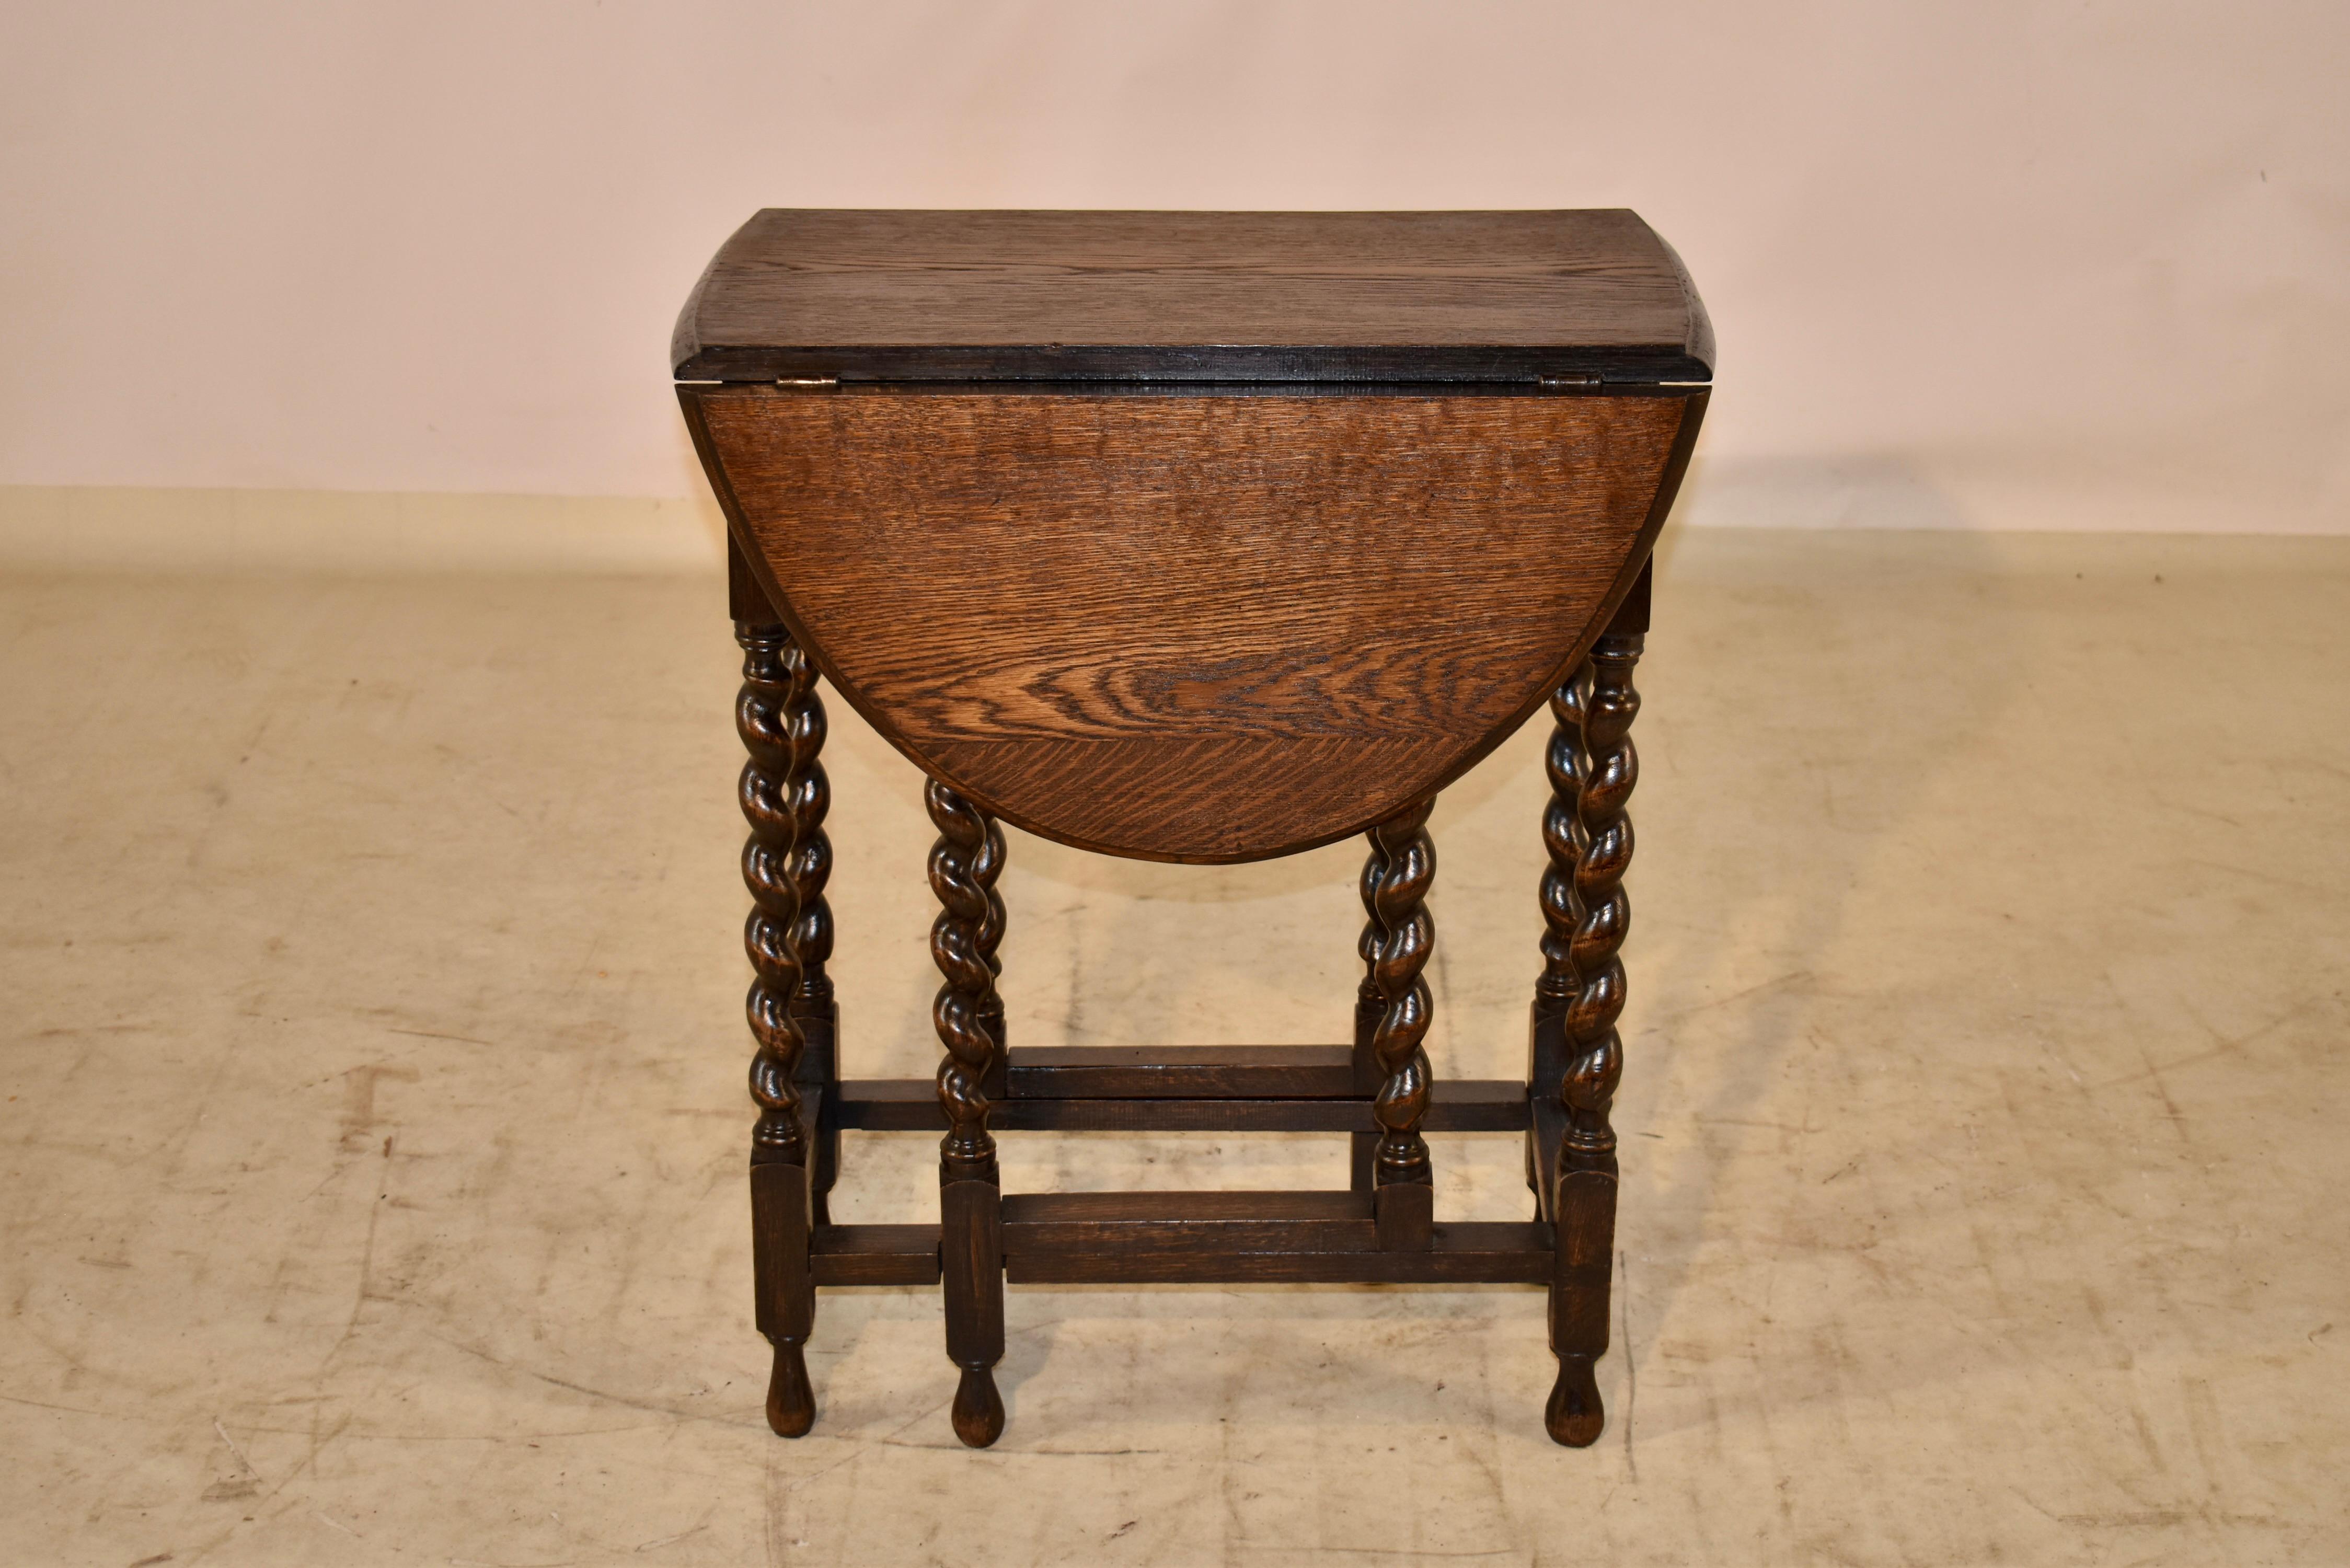 Circa 1900 oak gate leg table from England with a beveled edge around the top, following down to a simple apron and supported on hand turned barley twist legs, joined by simple stretchers. The top measures 35 inches x 23.5 inches when open.